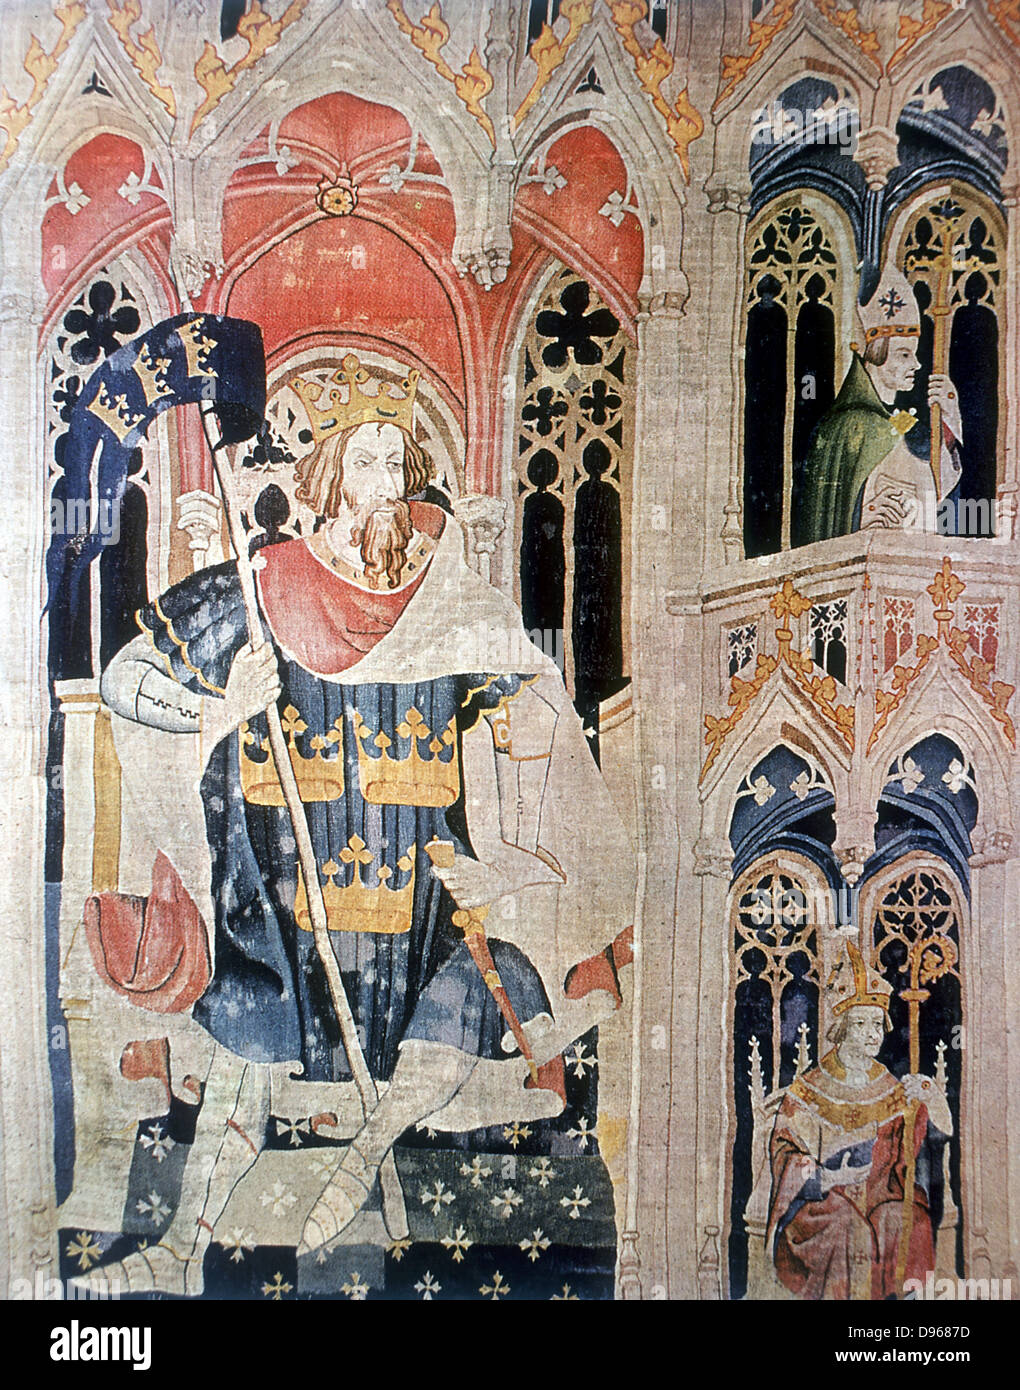 Arthur, 6th century semi-legendary Christian king of Britons. United Britons against Saxons whom he defeated c516 at battle of Badon Hill. After late 14th century tapestry. Stock Photo